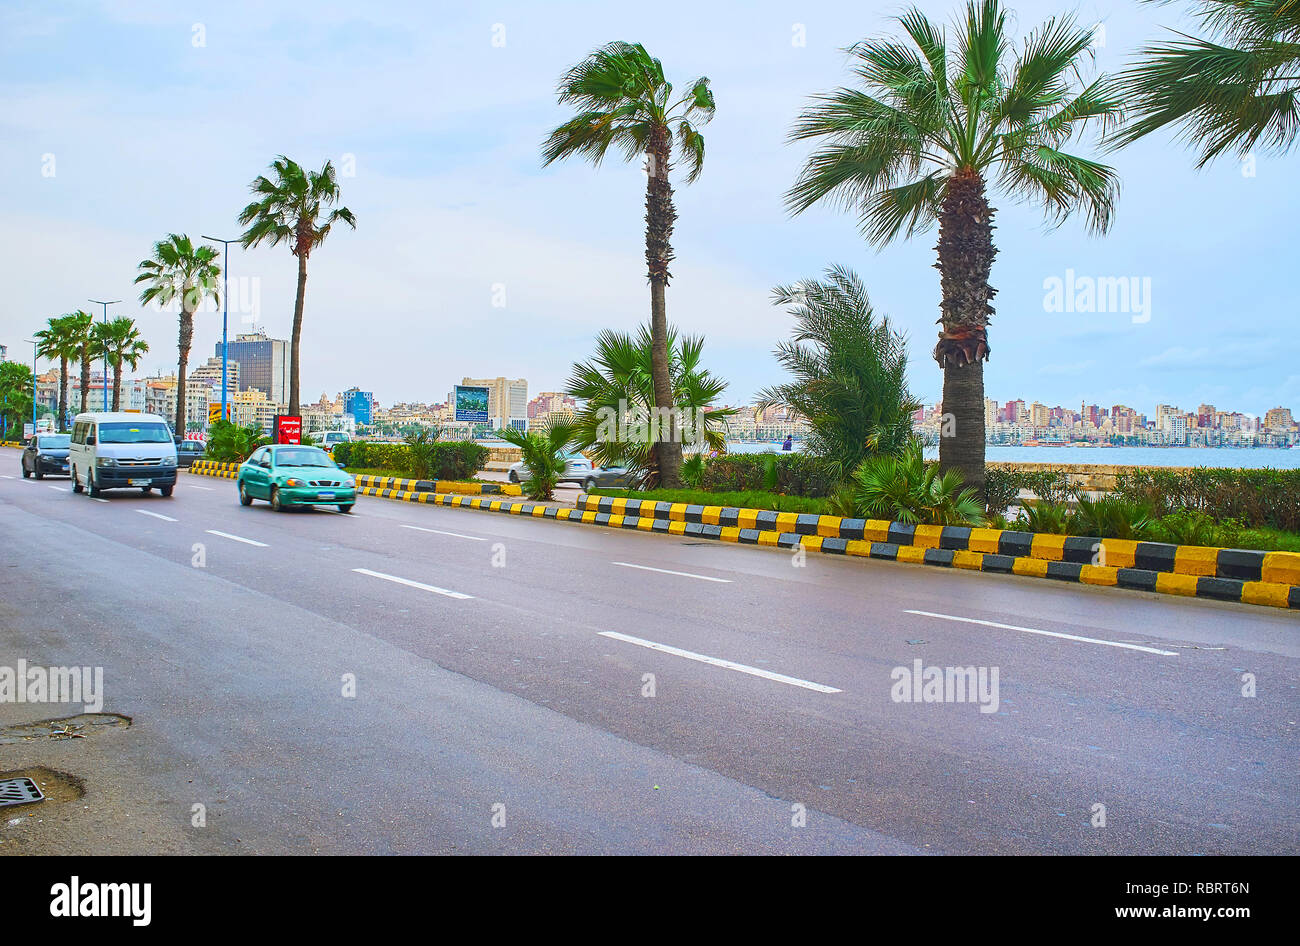 ALEXANDRIA, EGYPT - DECEMBER 19, 2018: The lush tall palm trees grow in Corniche Avenue, stretching along the Mediterranean coast of the city, on Dece Stock Photo